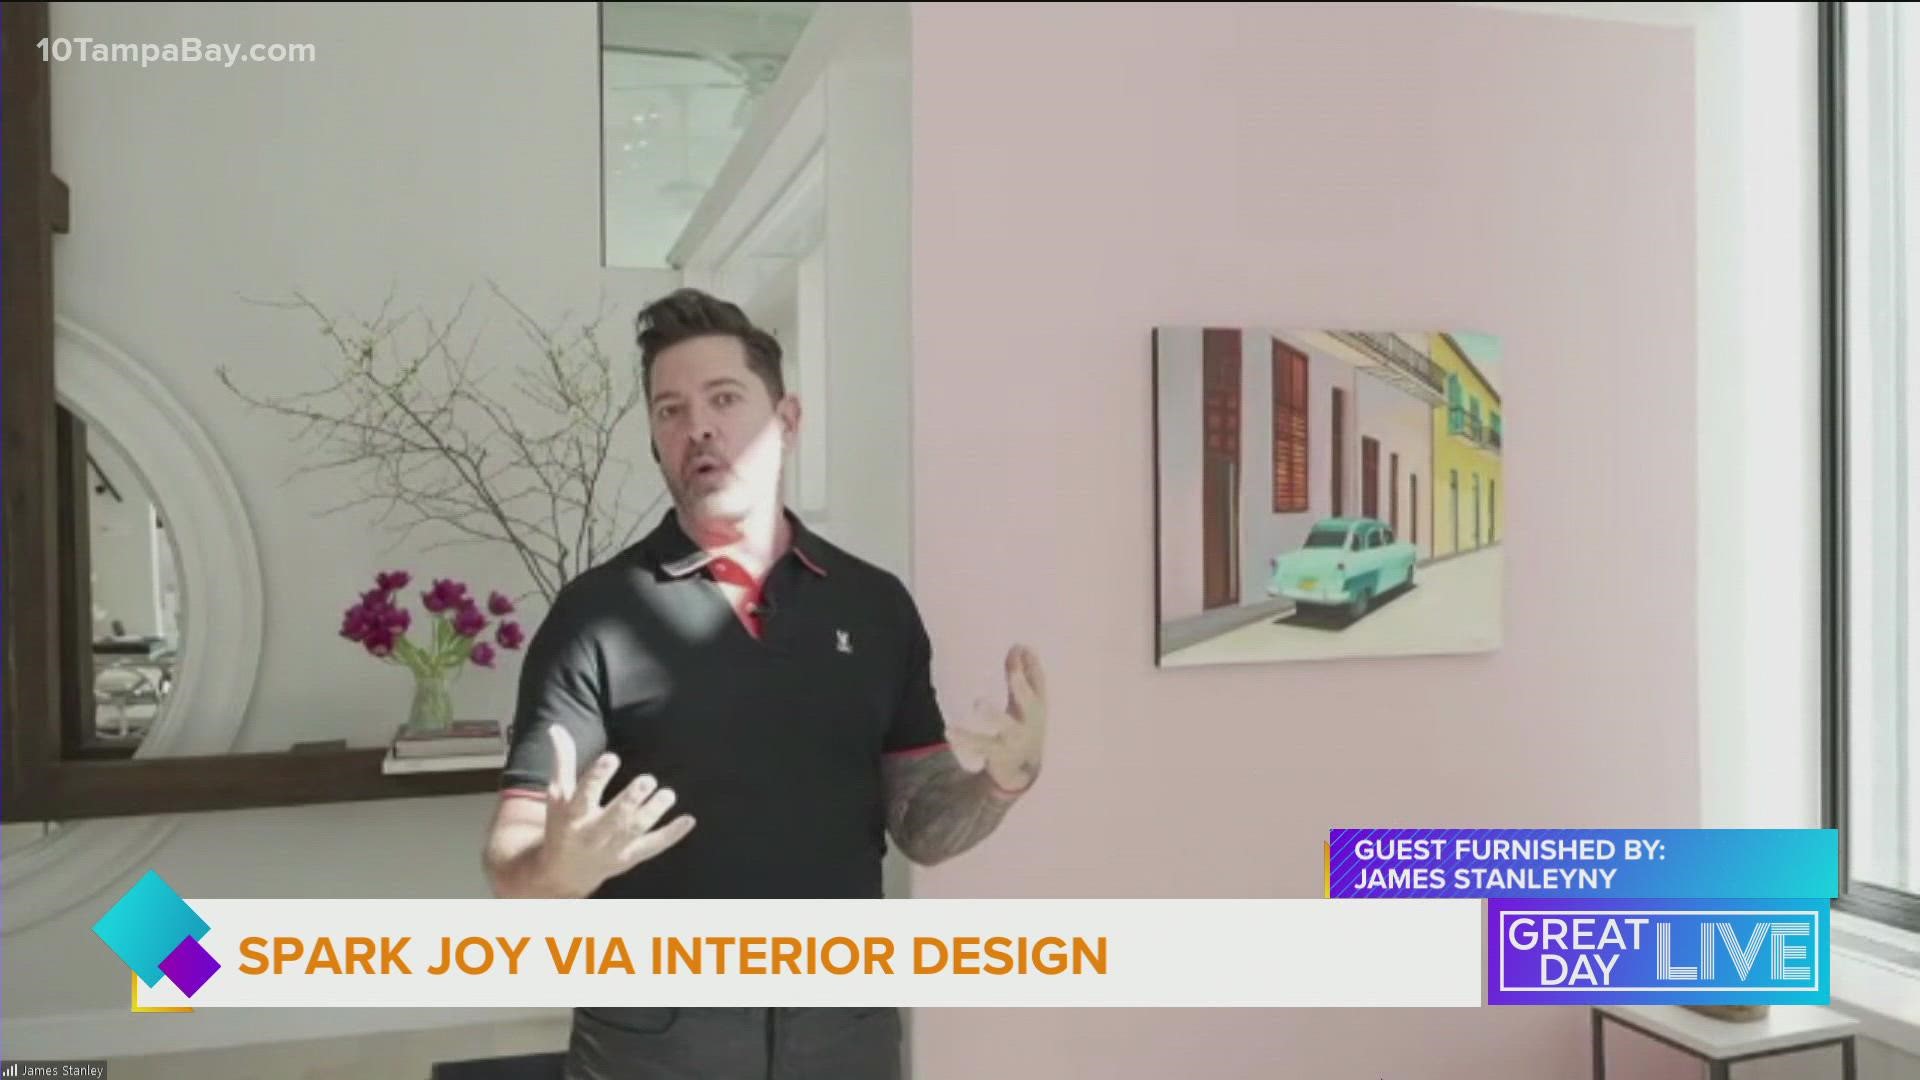 Use paint, lighting, art, texture, and accessories to spark joy in your space.